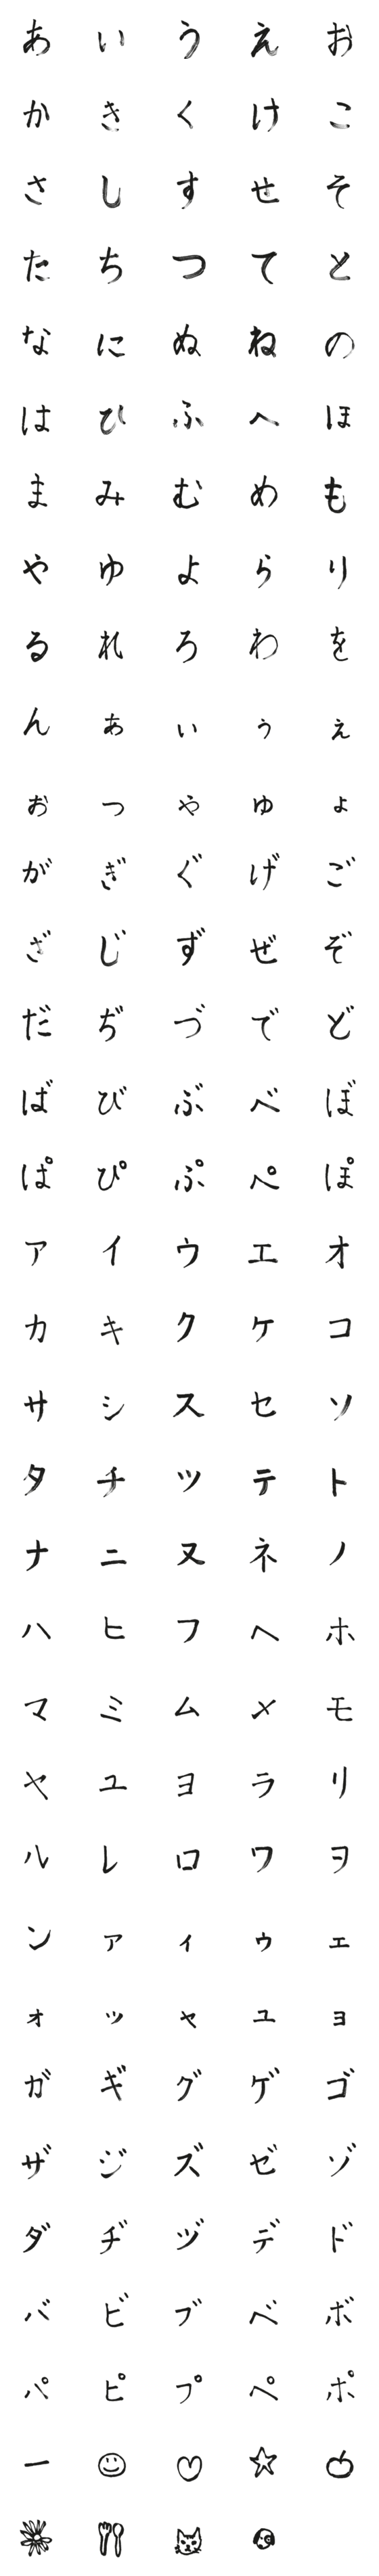 [LINE絵文字]Calligraphy style fontの画像一覧